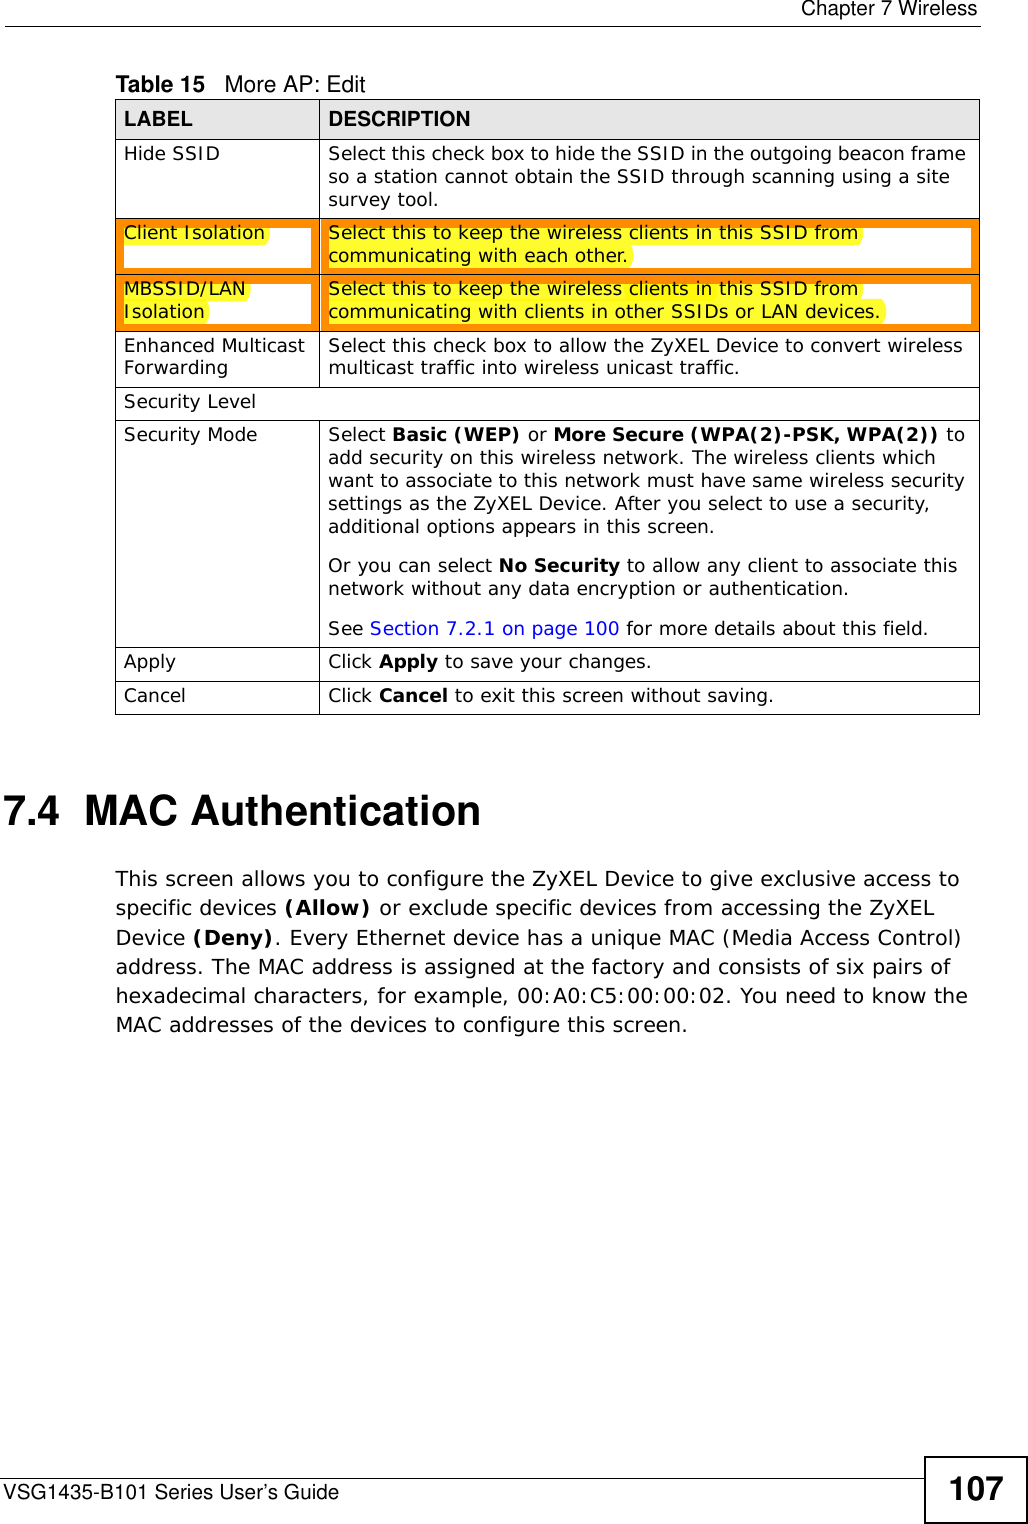  Chapter 7 WirelessVSG1435-B101 Series User’s Guide 1077.4  MAC Authentication    This screen allows you to configure the ZyXEL Device to give exclusive access to specific devices (Allow) or exclude specific devices from accessing the ZyXEL Device (Deny). Every Ethernet device has a unique MAC (Media Access Control) address. The MAC address is assigned at the factory and consists of six pairs of hexadecimal characters, for example, 00:A0:C5:00:00:02. You need to know the MAC addresses of the devices to configure this screen.Hide SSID Select this check box to hide the SSID in the outgoing beacon frame so a station cannot obtain the SSID through scanning using a site survey tool.Client Isolation  Select this to keep the wireless clients in this SSID from communicating with each other.MBSSID/LAN Isolation  Select this to keep the wireless clients in this SSID from communicating with clients in other SSIDs or LAN devices.Enhanced Multicast Forwarding  Select this check box to allow the ZyXEL Device to convert wireless multicast traffic into wireless unicast traffic.Security LevelSecurity Mode Select Basic (WEP) or More Secure (WPA(2)-PSK, WPA(2)) to add security on this wireless network. The wireless clients which want to associate to this network must have same wireless security settings as the ZyXEL Device. After you select to use a security, additional options appears in this screen.  Or you can select No Security to allow any client to associate this network without any data encryption or authentication.See Section 7.2.1 on page 100 for more details about this field.Apply Click Apply to save your changes.Cancel Click Cancel to exit this screen without saving.Table 15   More AP: EditLABEL DESCRIPTION